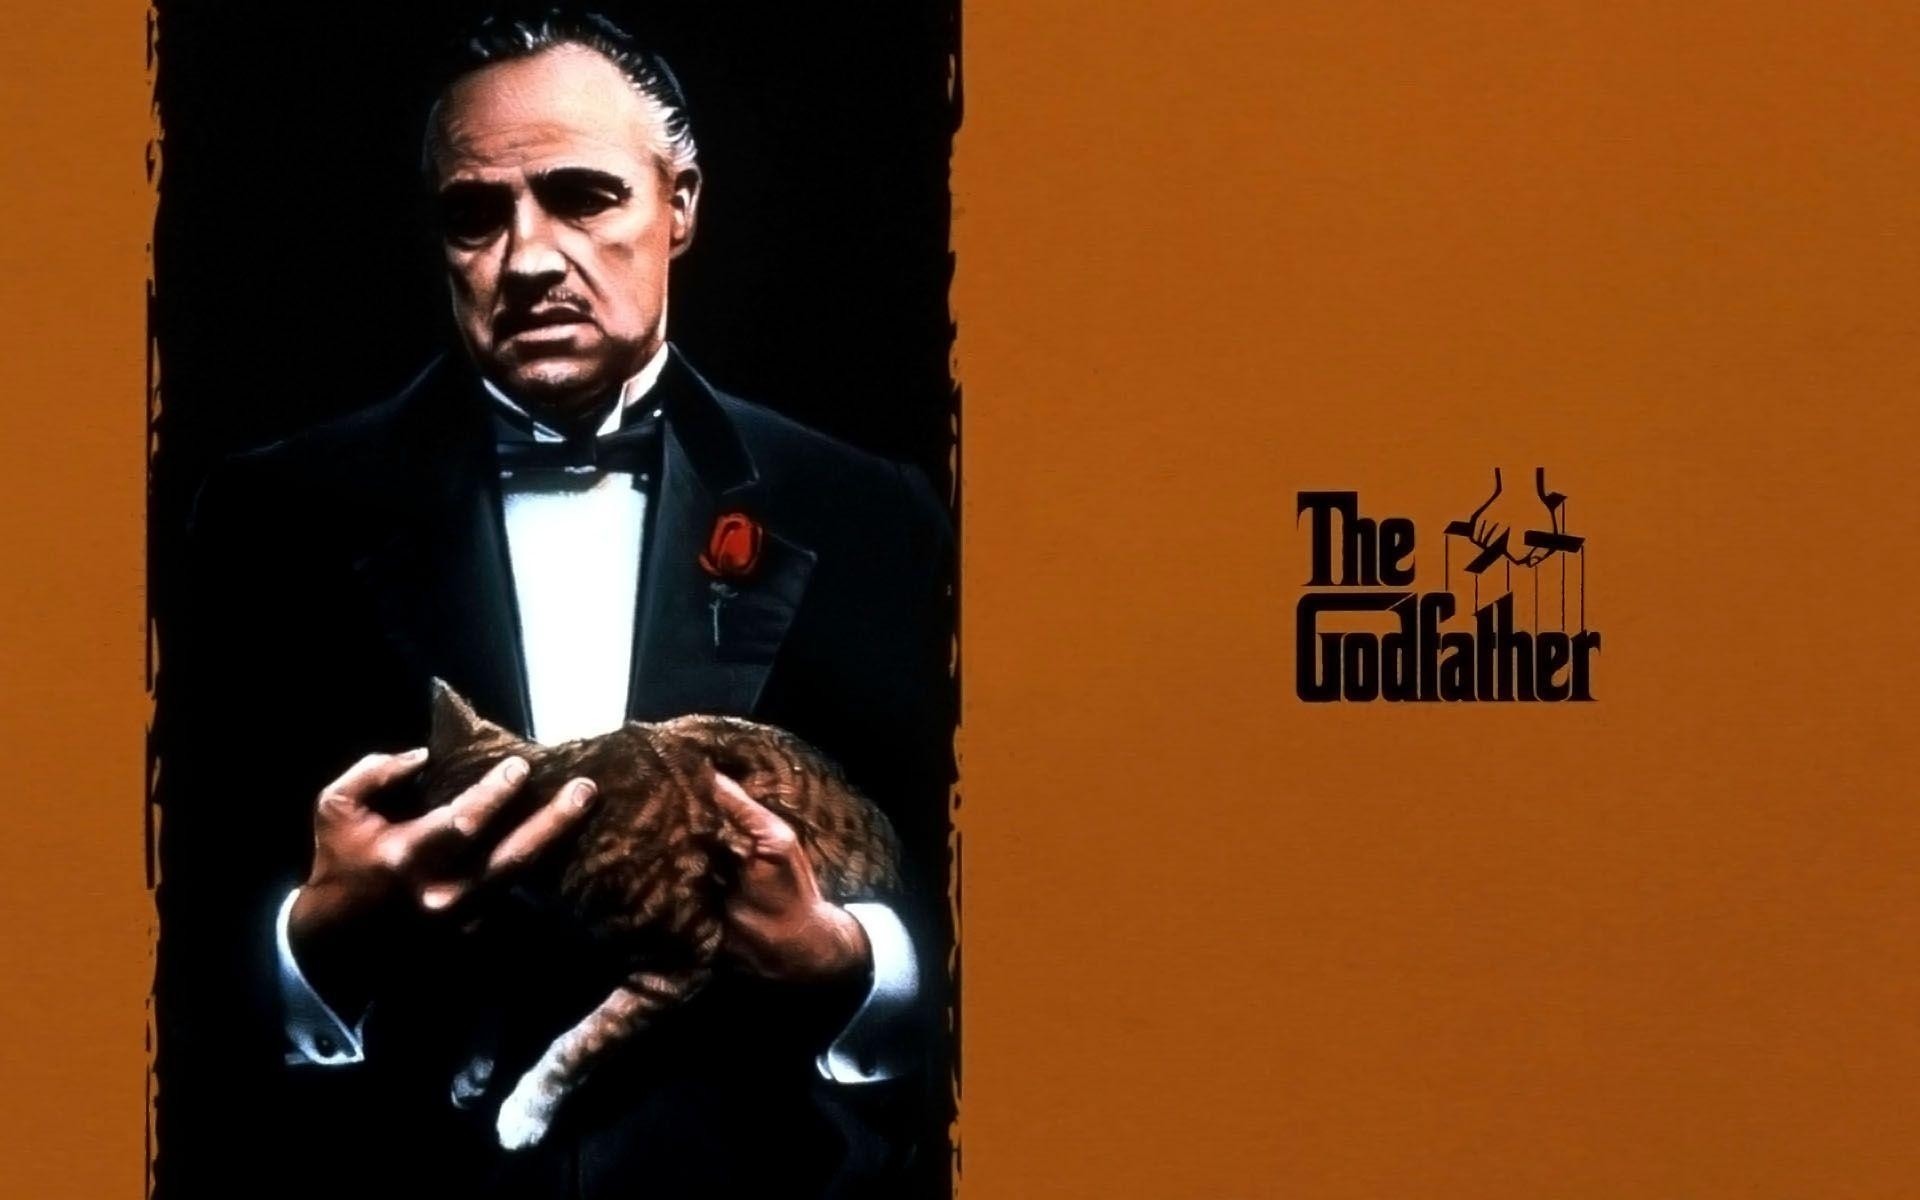 1920x1200 Wallpapers The Godfather - Wallpaper Cave